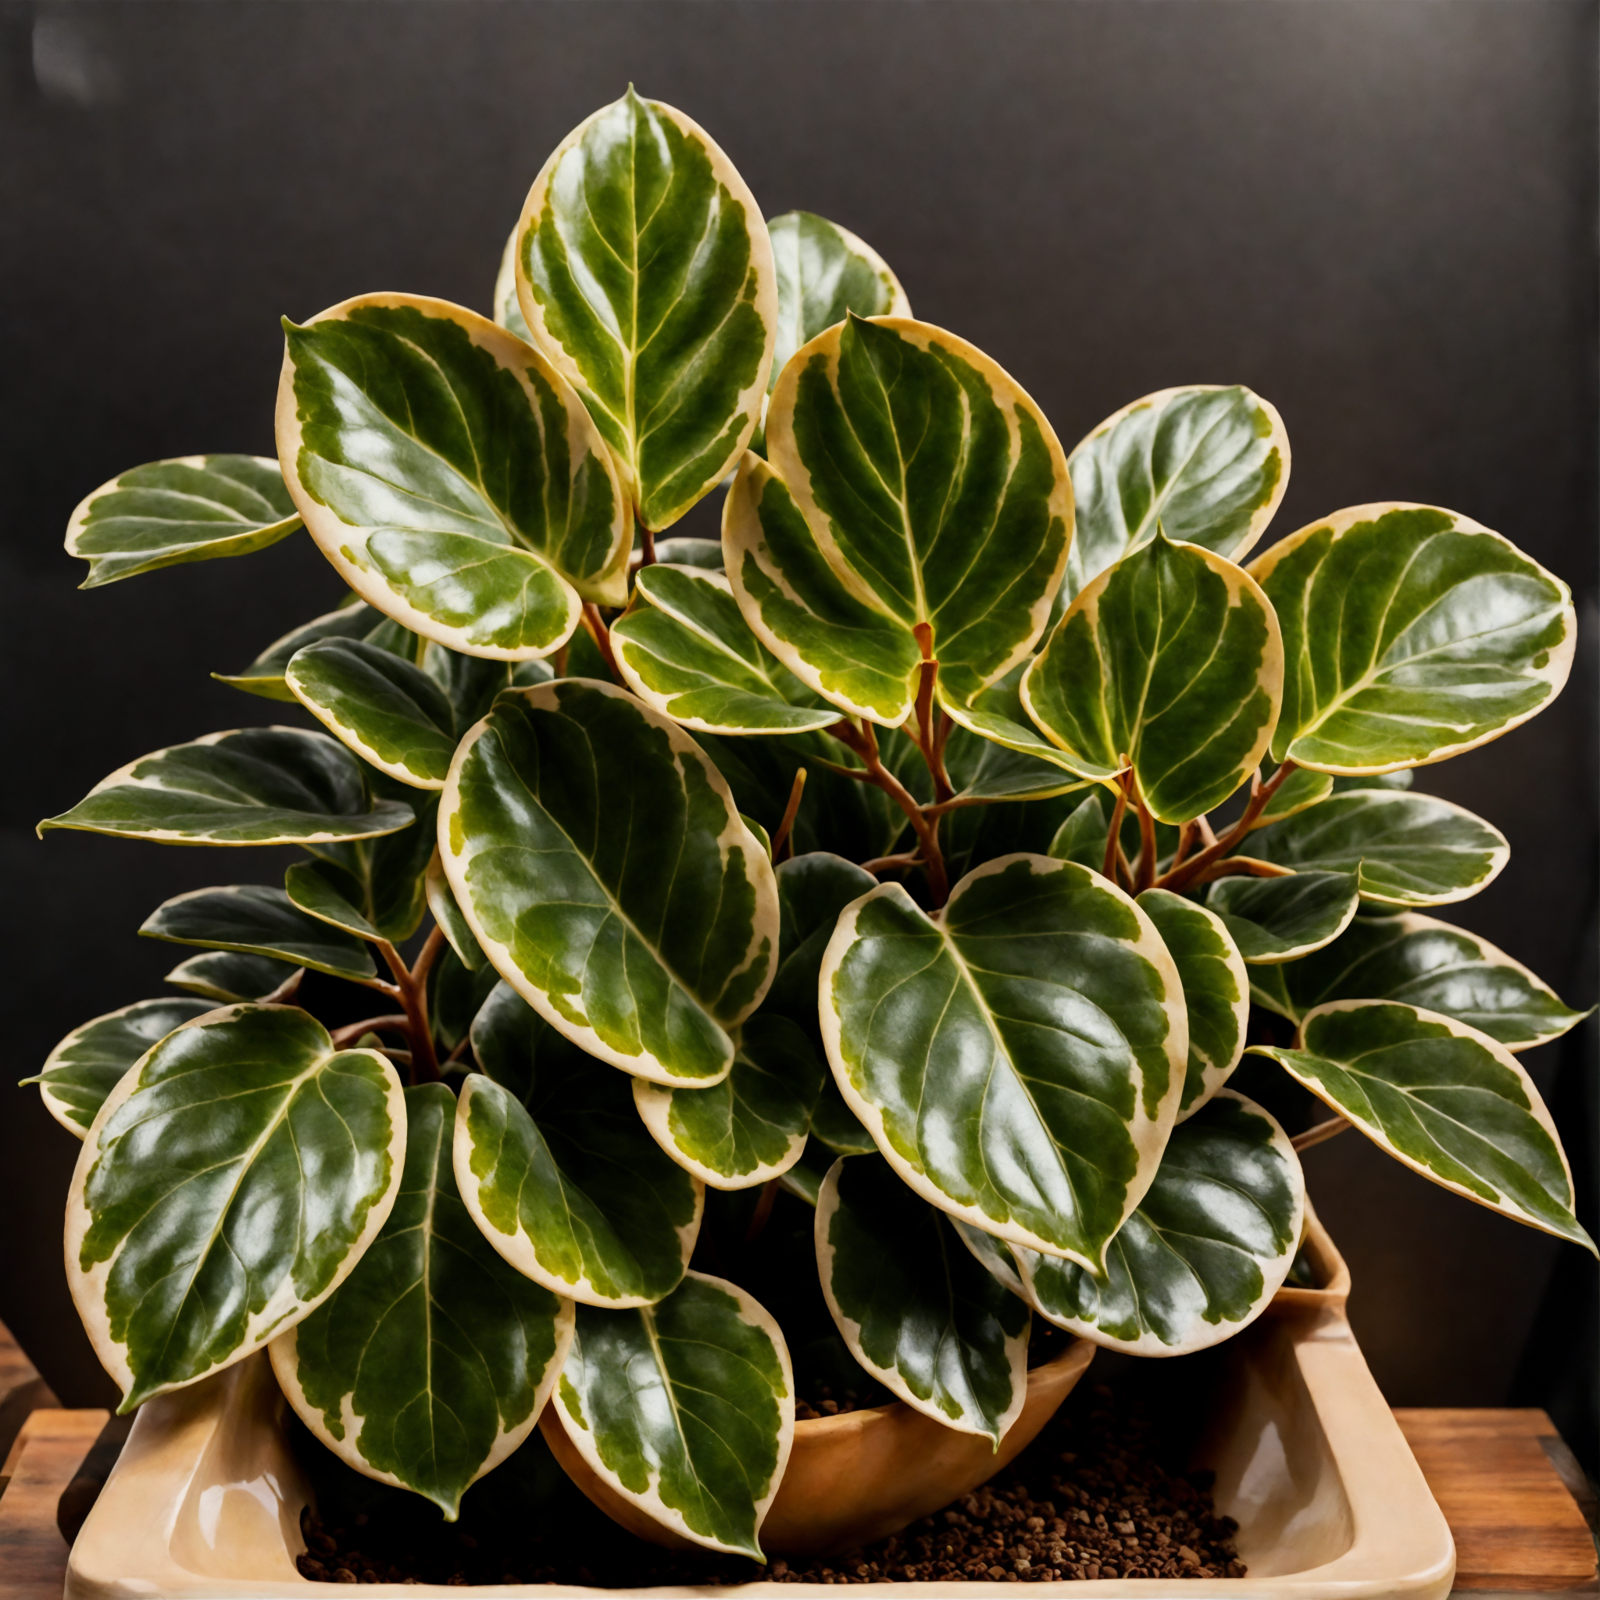 Peperomia obtusifolia in a planter, with lush leaves, against a dark background, in clear, neutral-toned lighting.